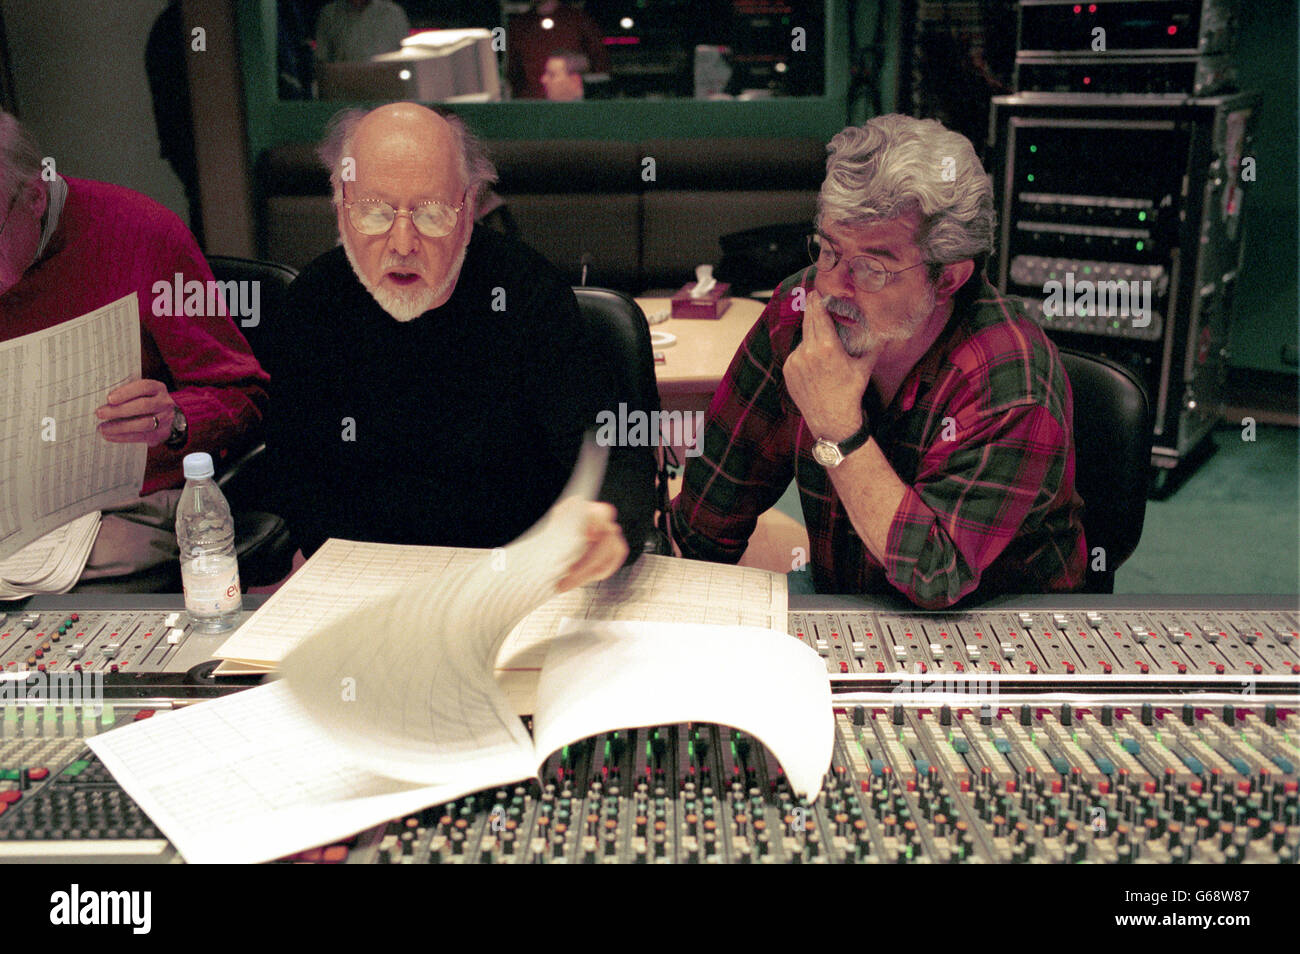 Composer John Williams working, with George Lucas and the London Symphony Orchestra yesterday, January 20th 2002, during the recording of the music for the Star Wars movie Episode II – Attack of the Clones, at London's Abbey Road studios. Stock Photo